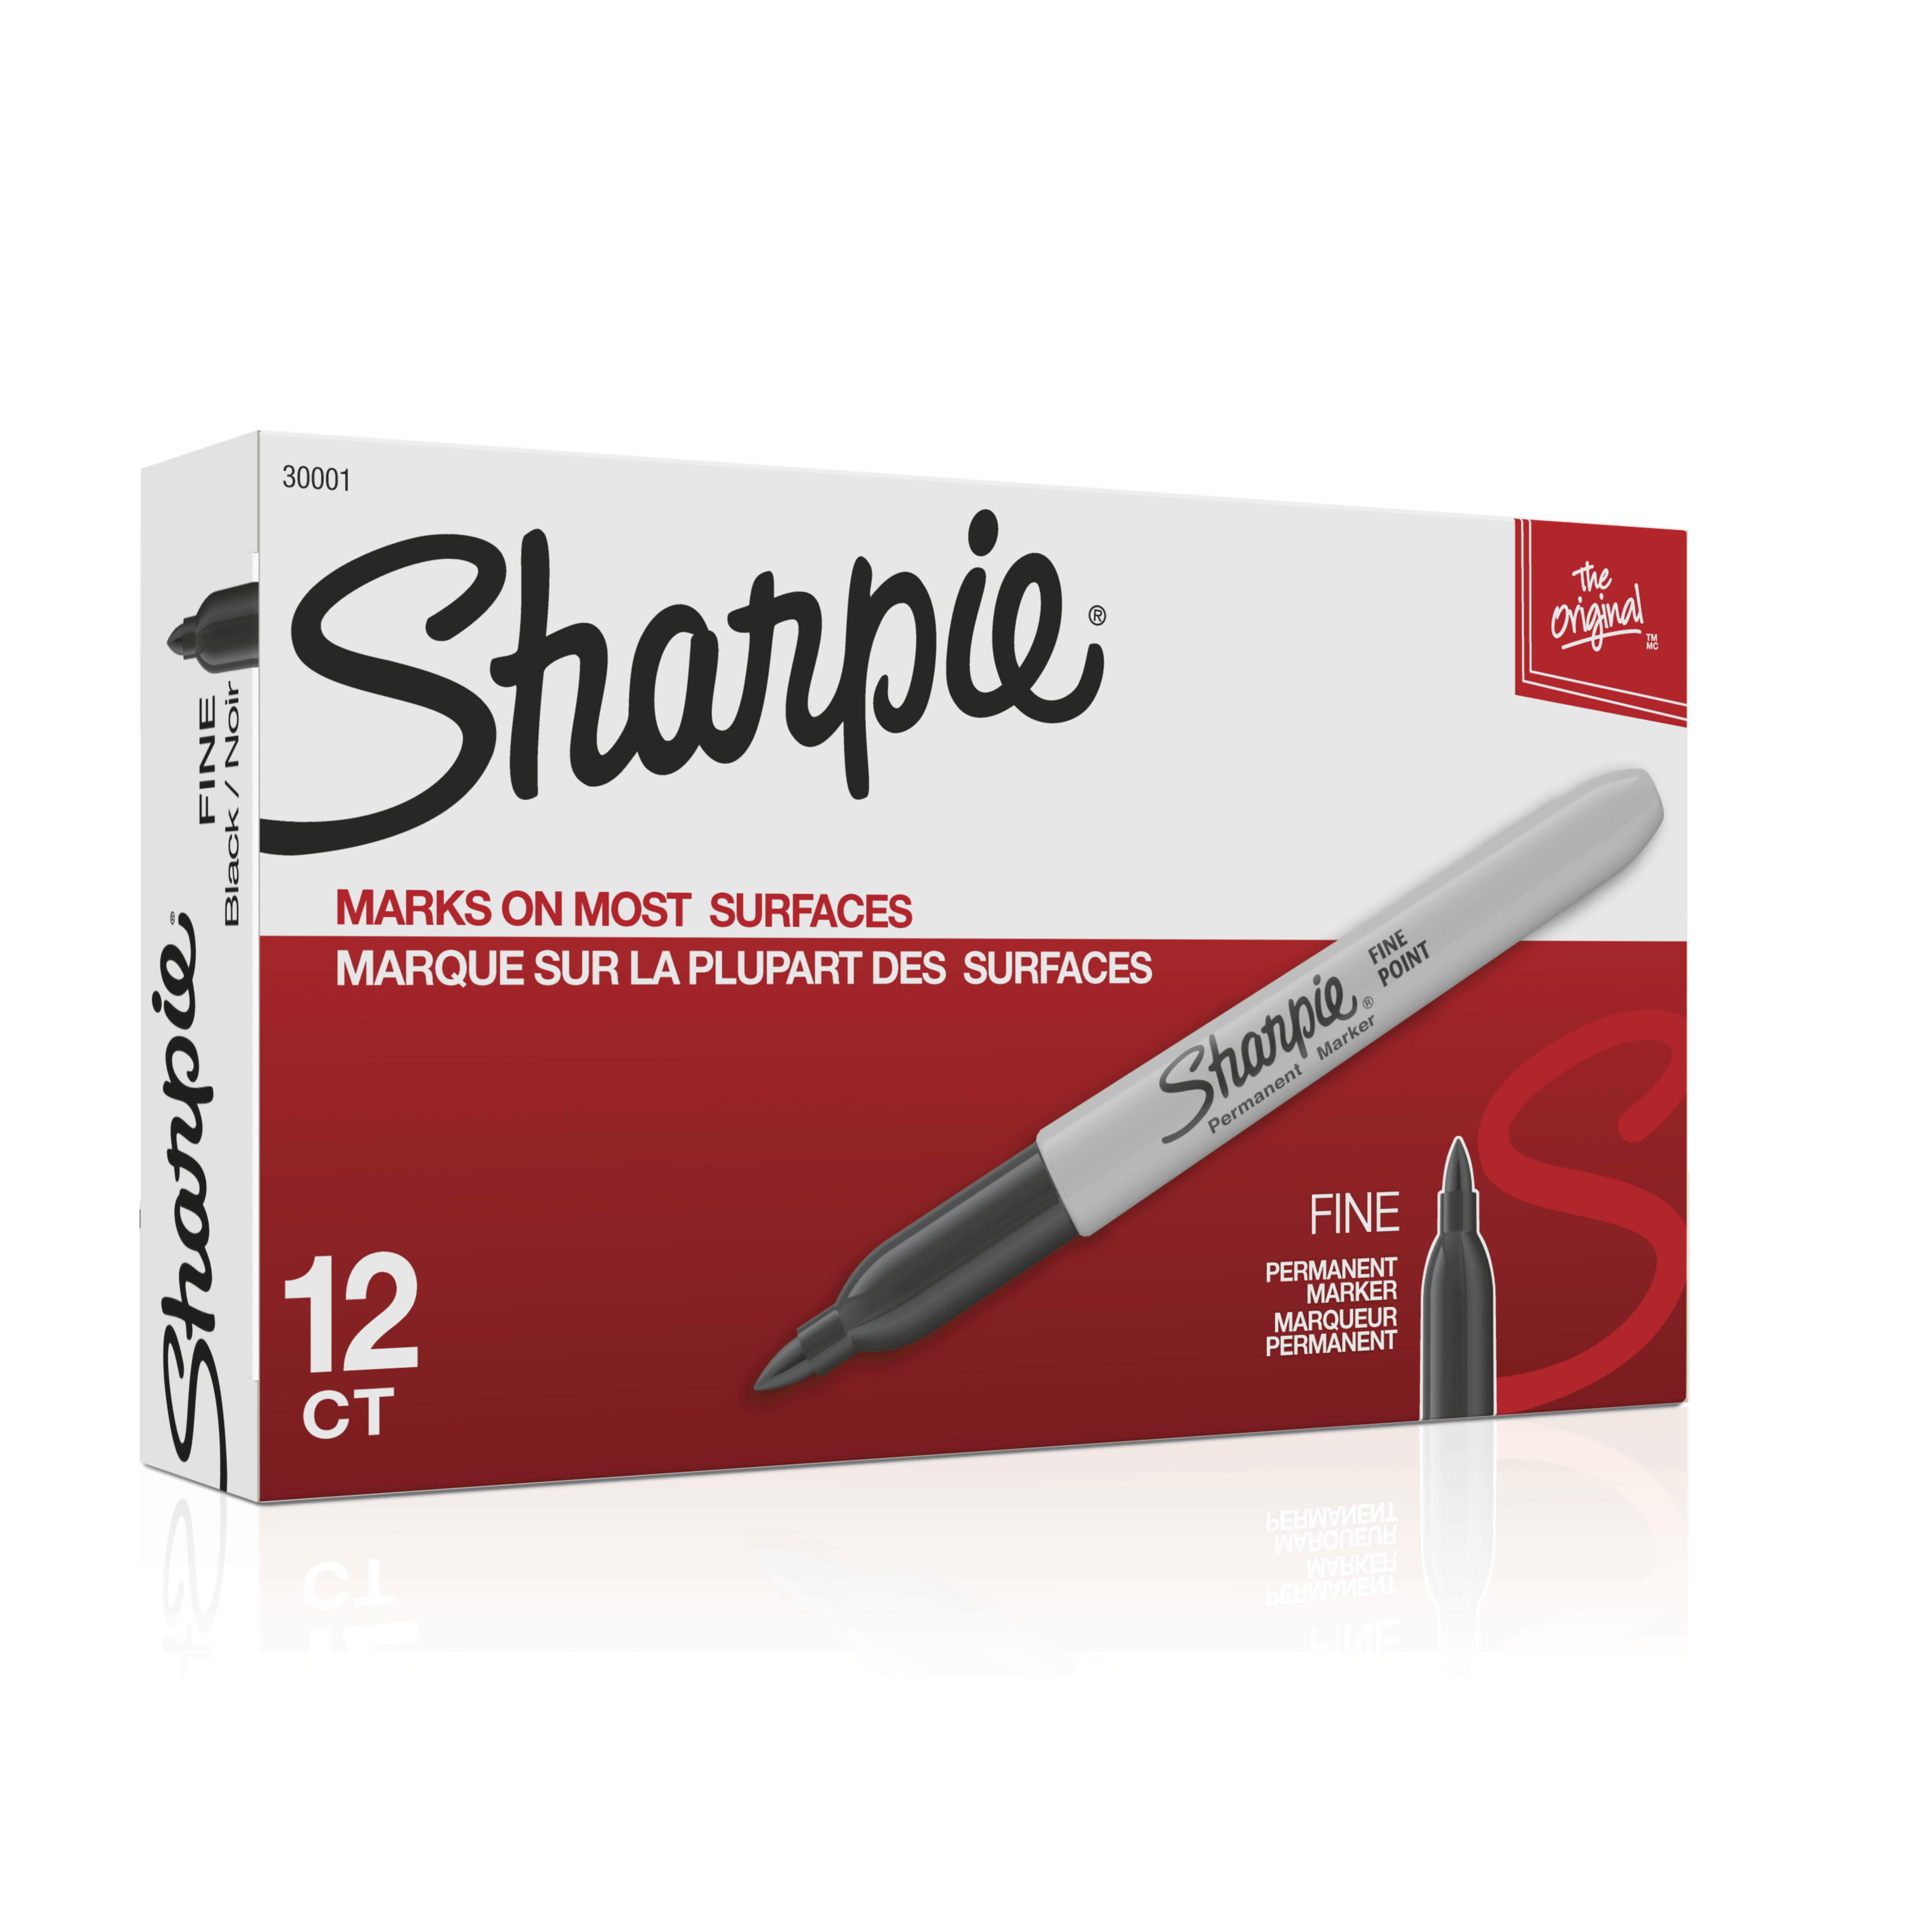 Sharpie Permanent Markers, Fine Point, Black, 12 Count - image 1 of 8